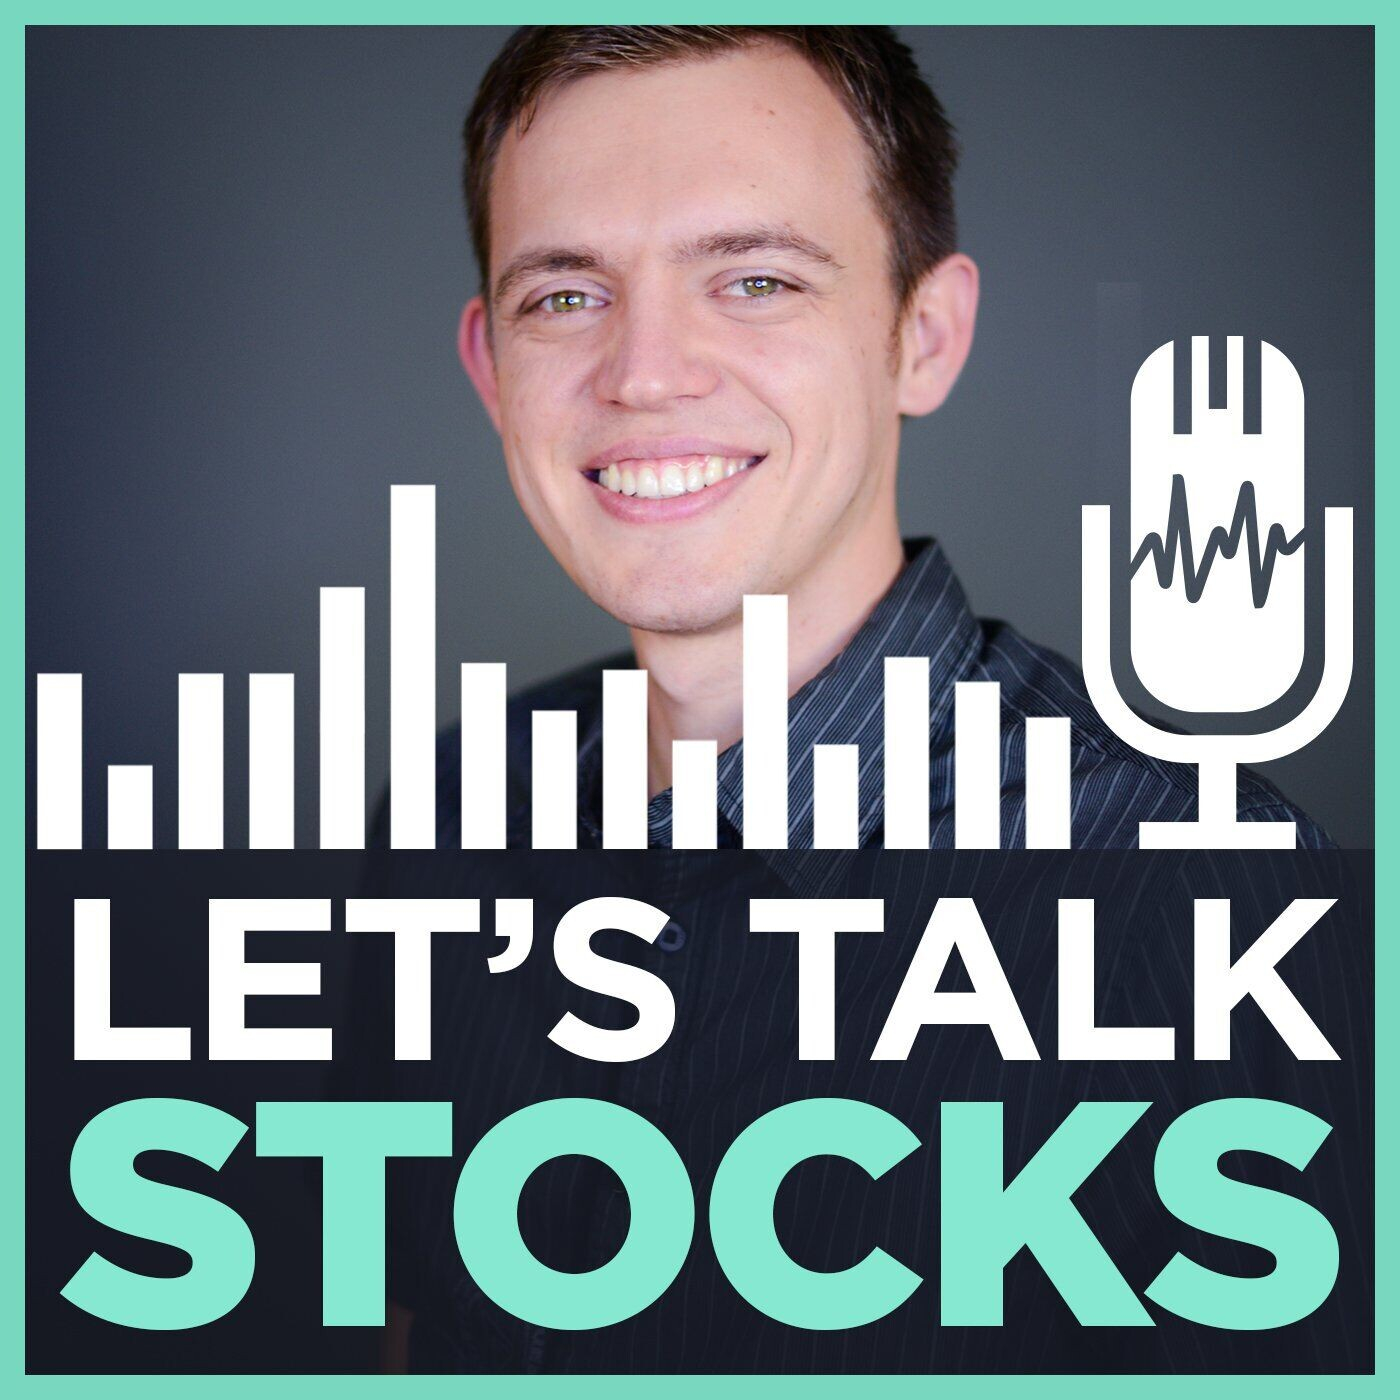 Ep 146: 12 Common MISTAKES Beginners Make in Stock Trading